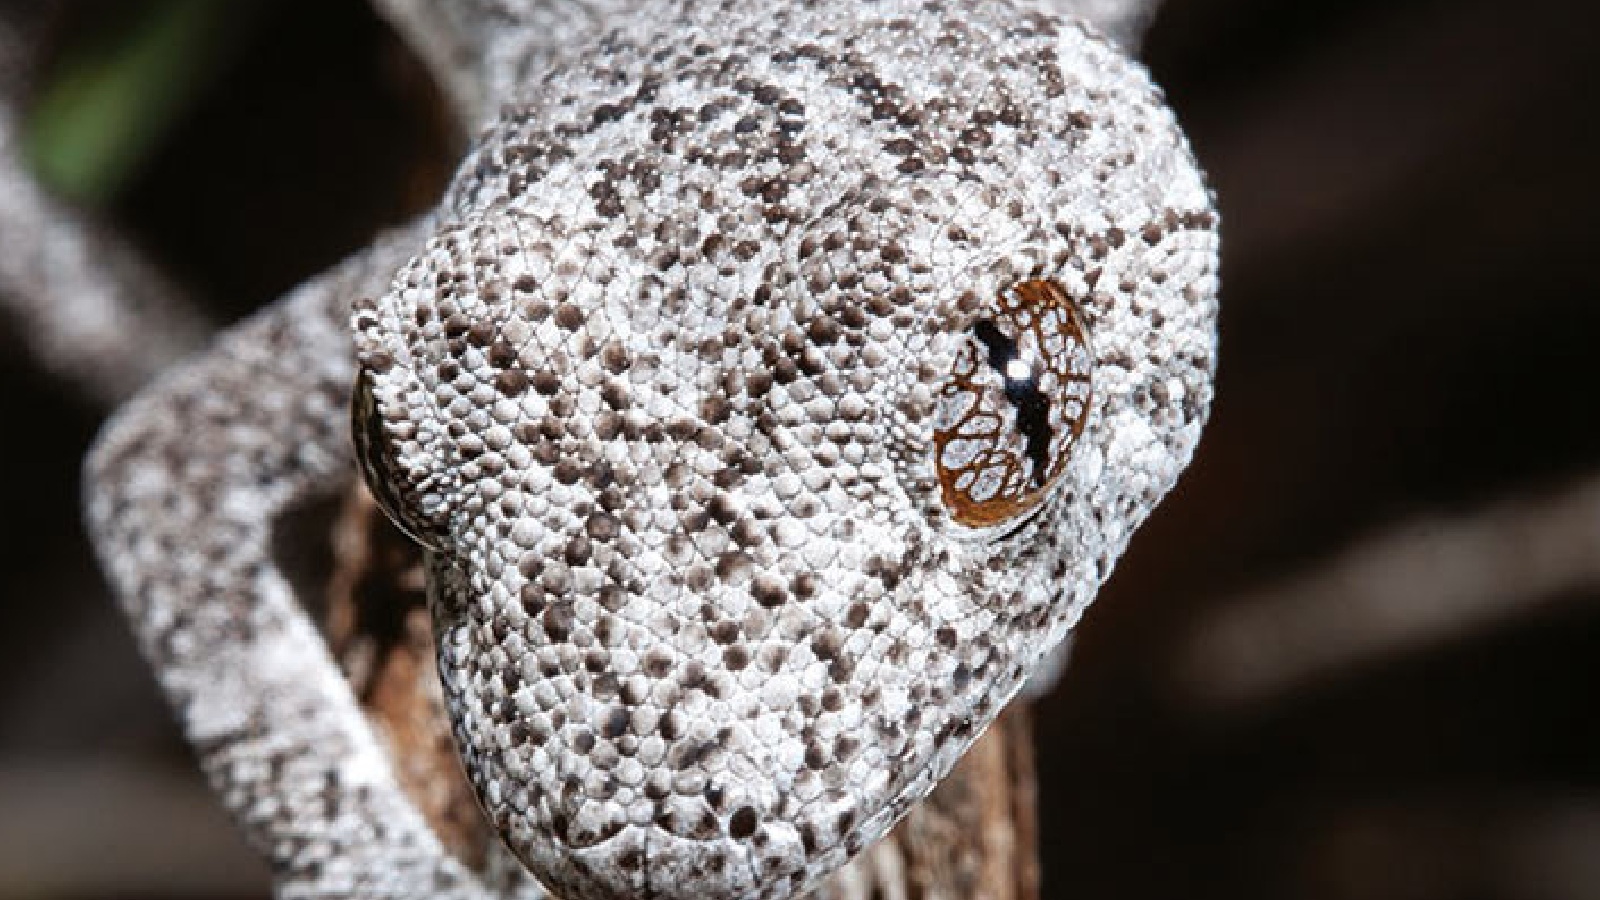 A close-up of the geckos hea showing its white and gray pattern